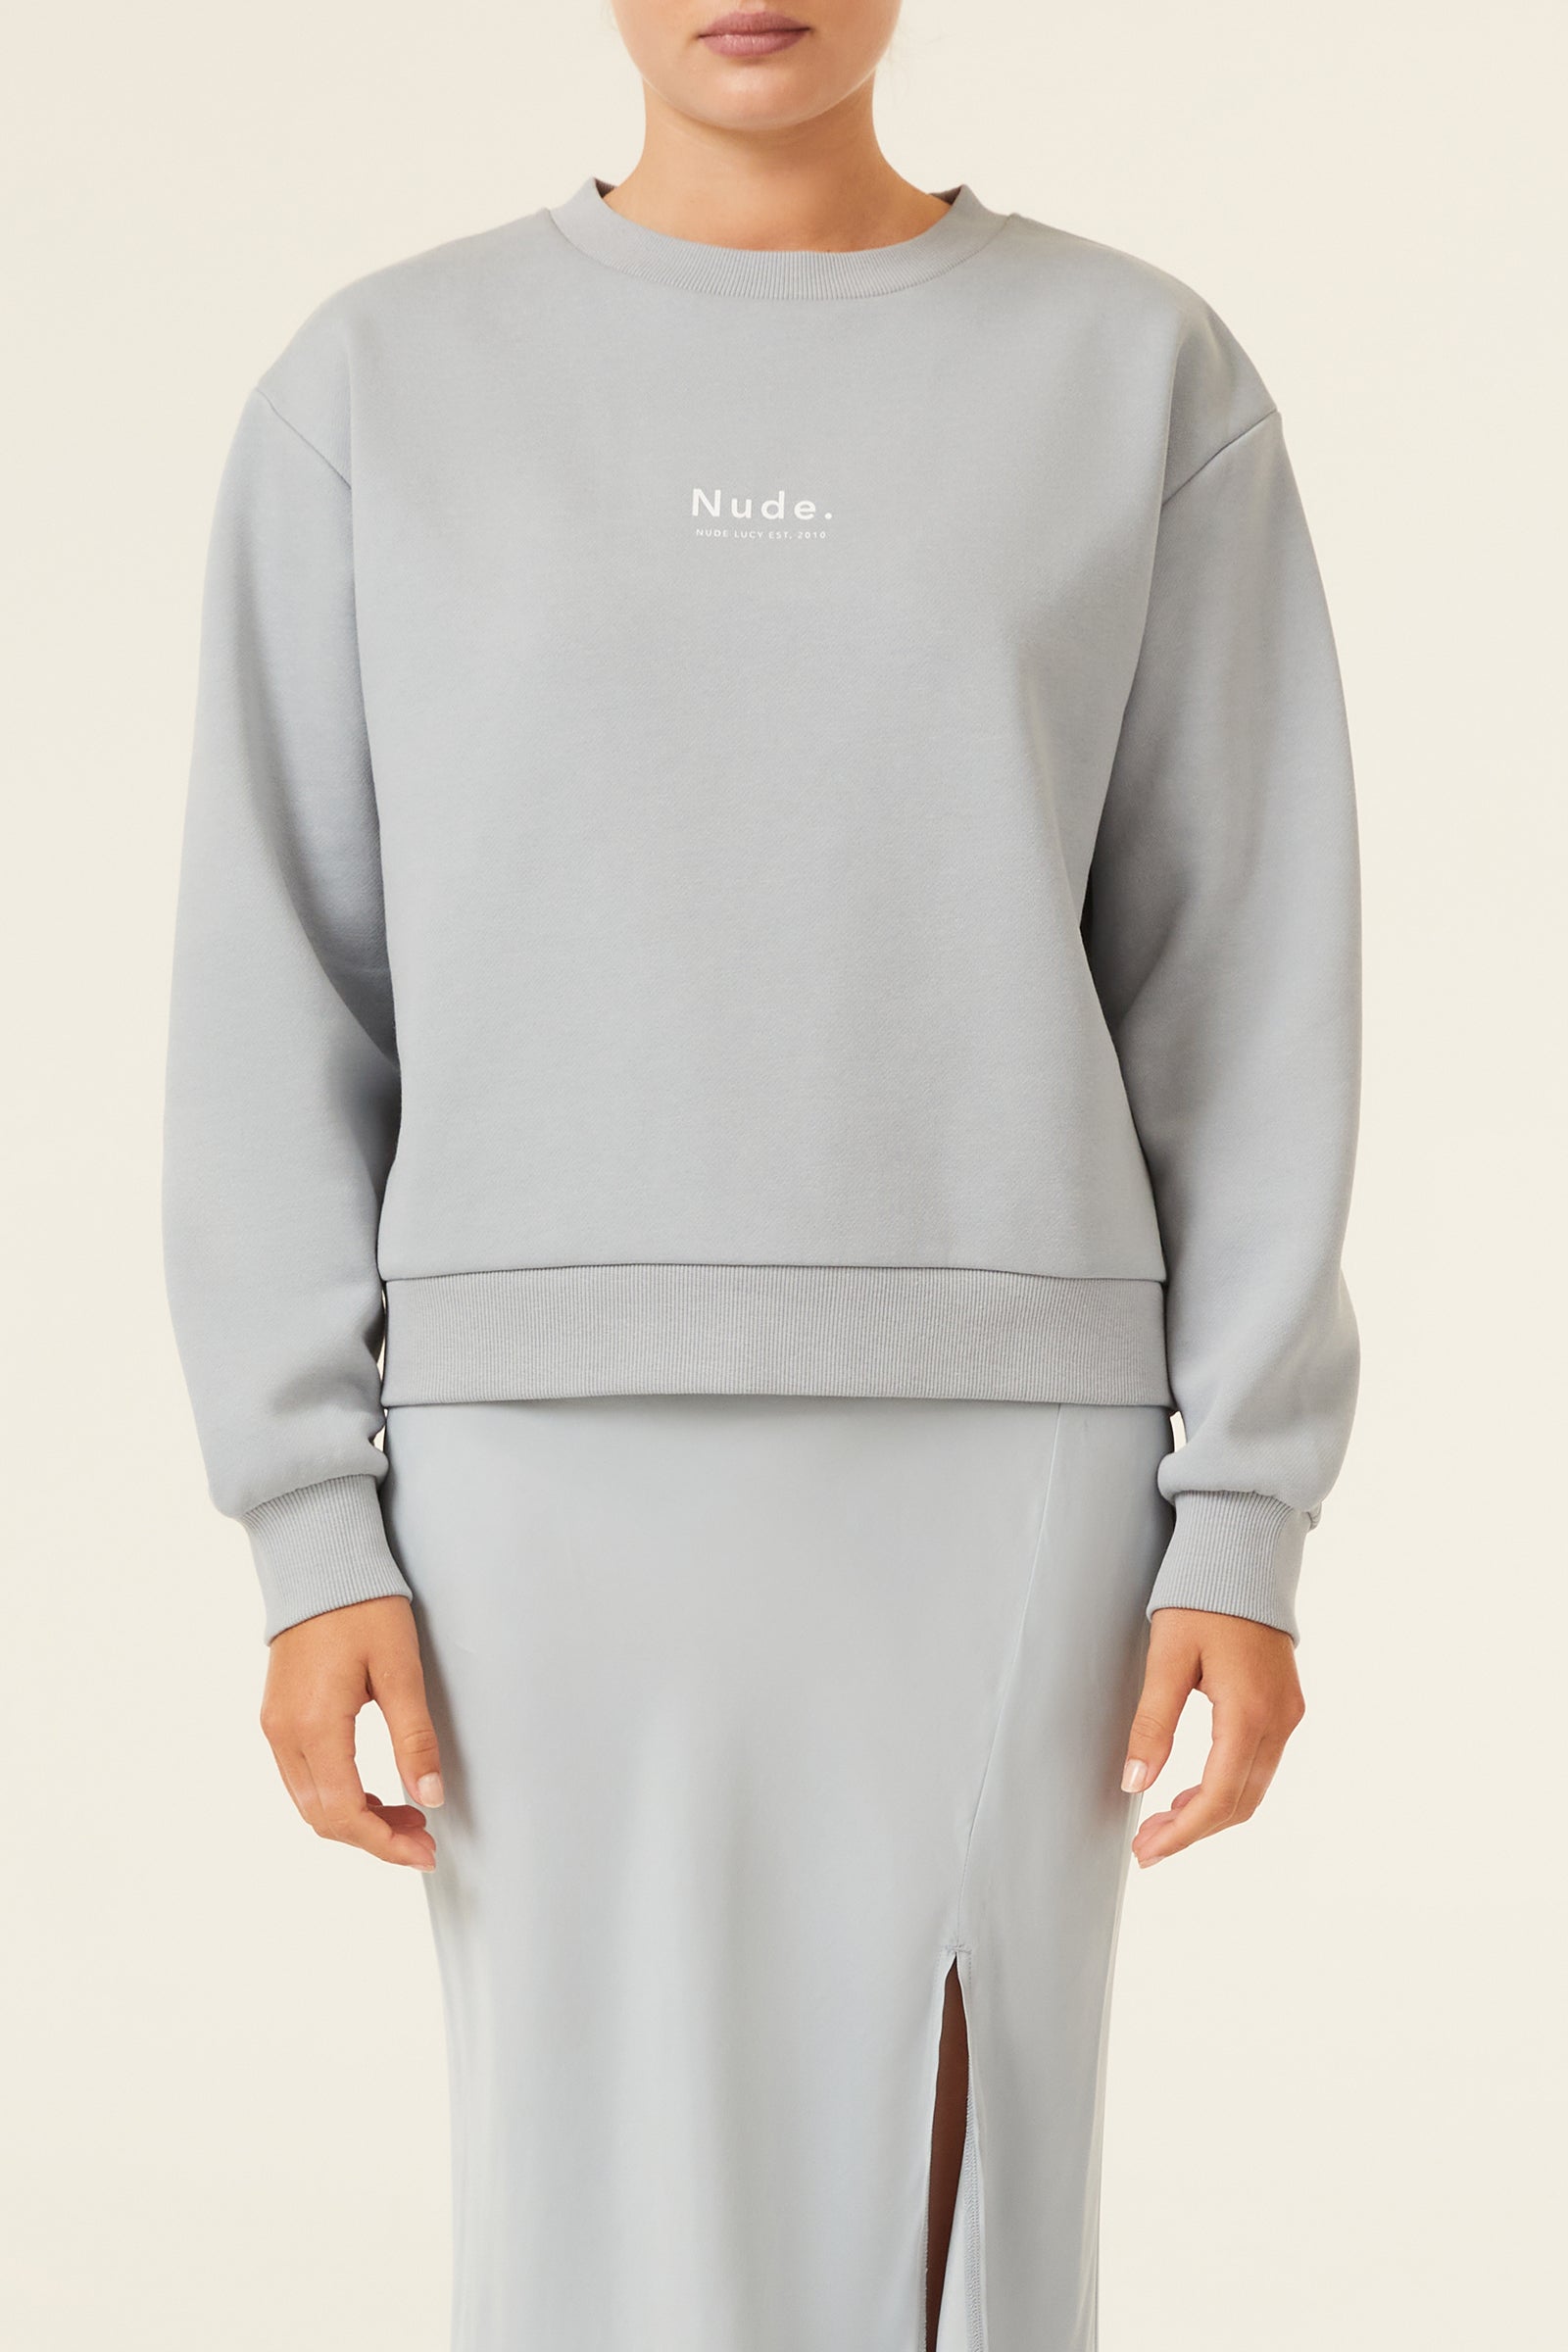 Nude Lucy Nude Heritage Sweat In A Green & Blue Toned Marine Colour 